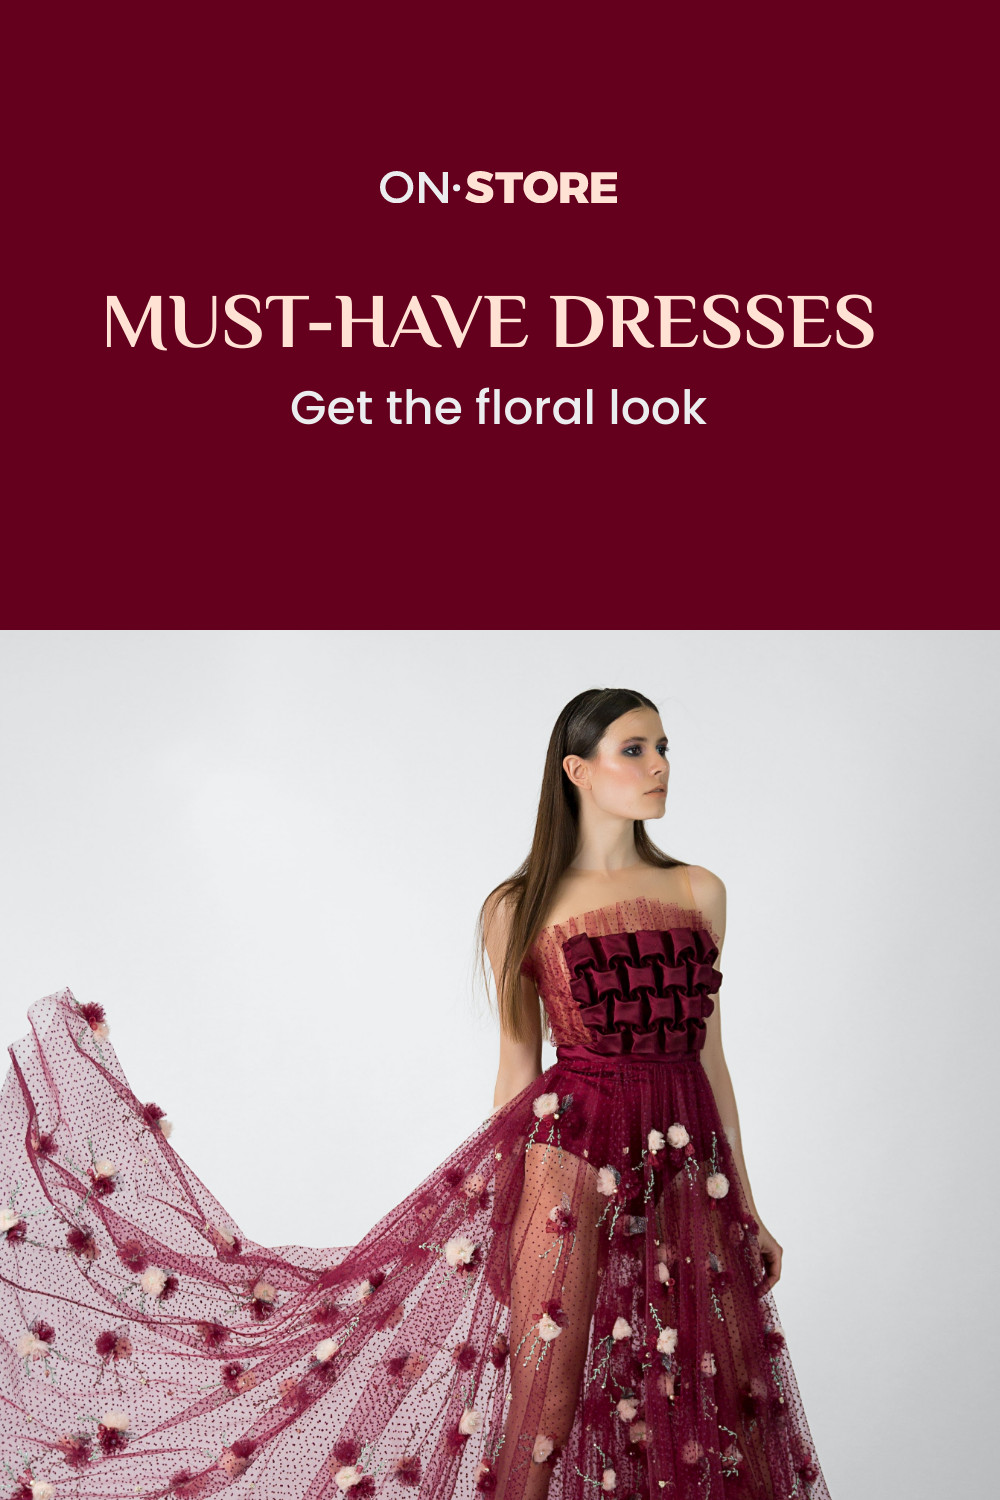 Must-have Dresses for Floral Look